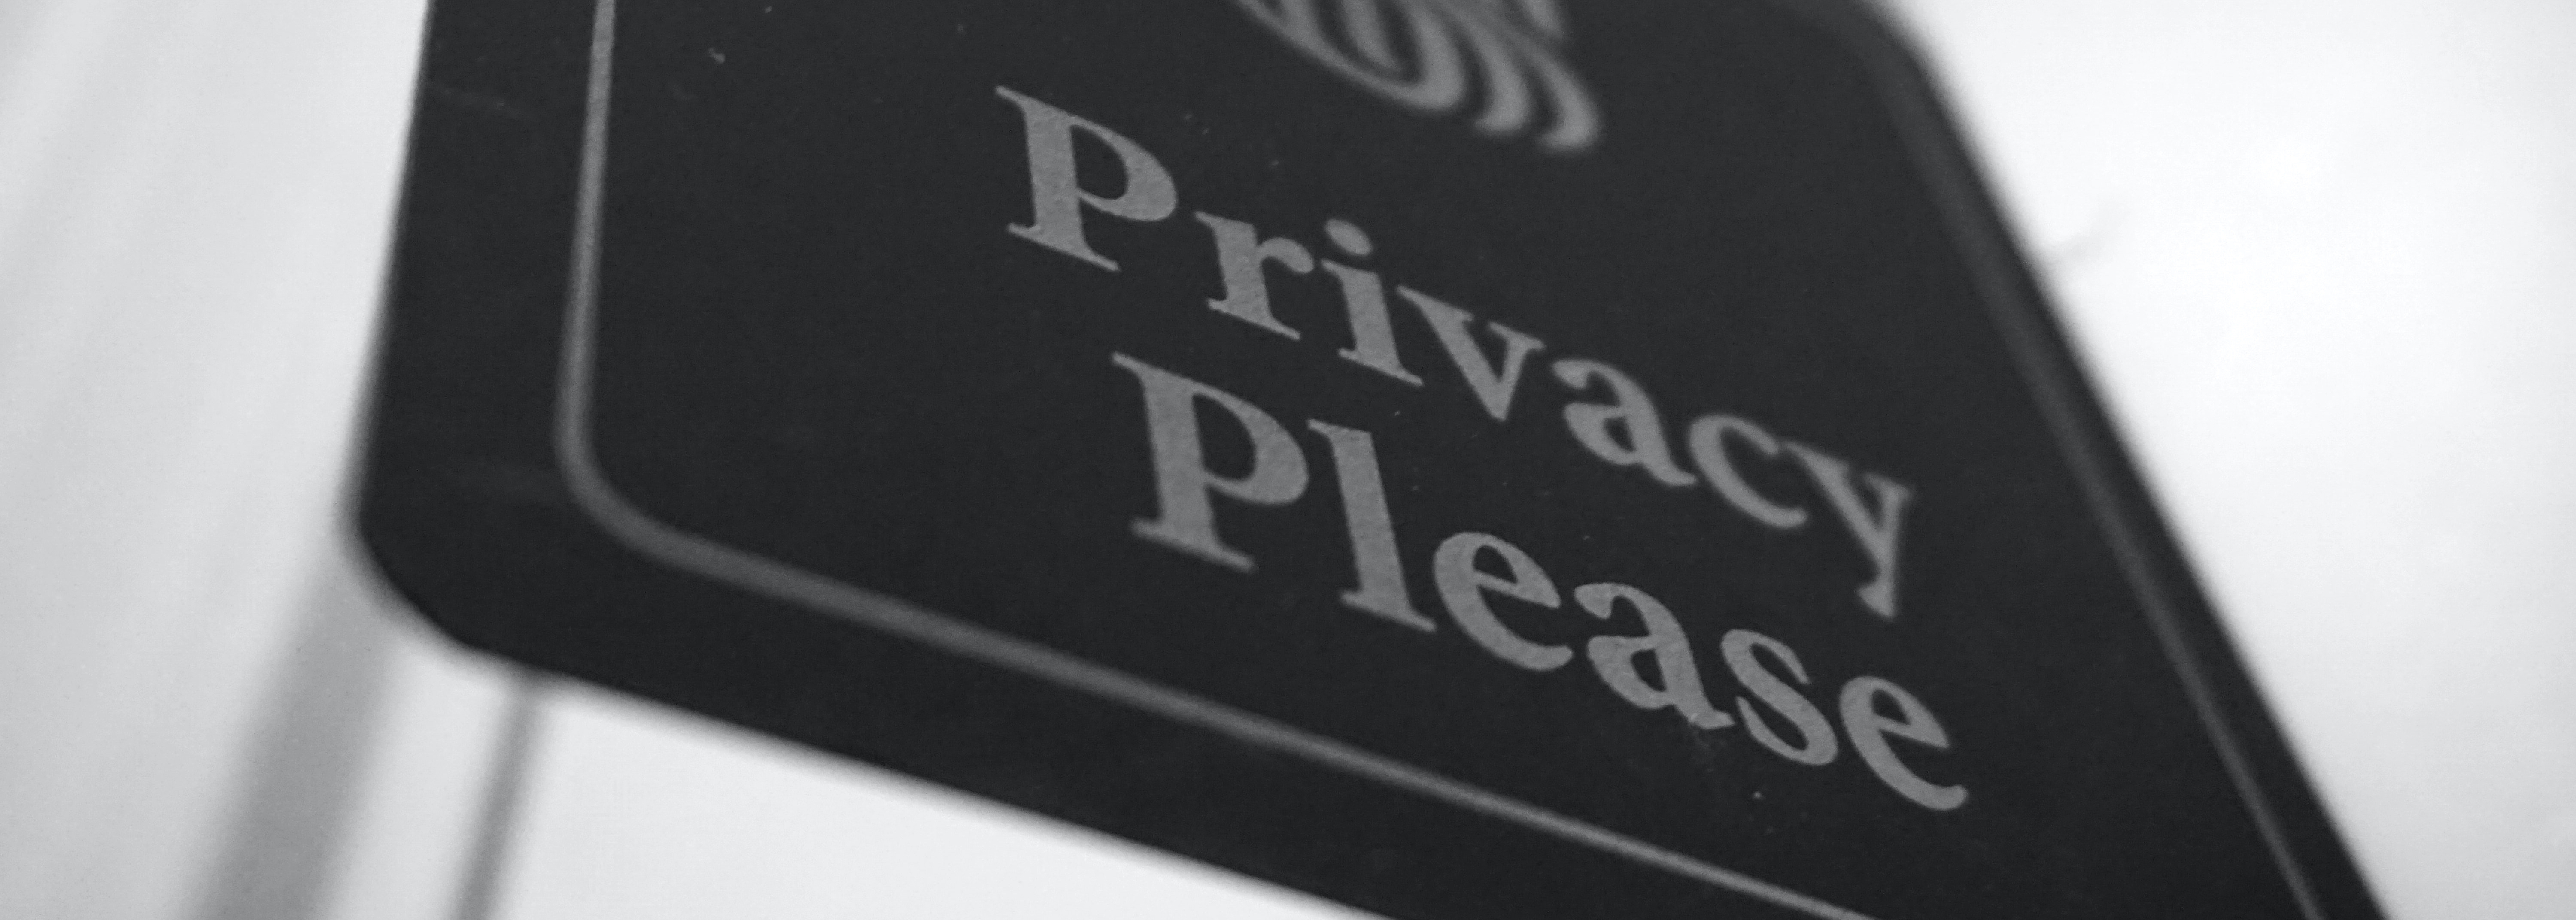 privacy please sign